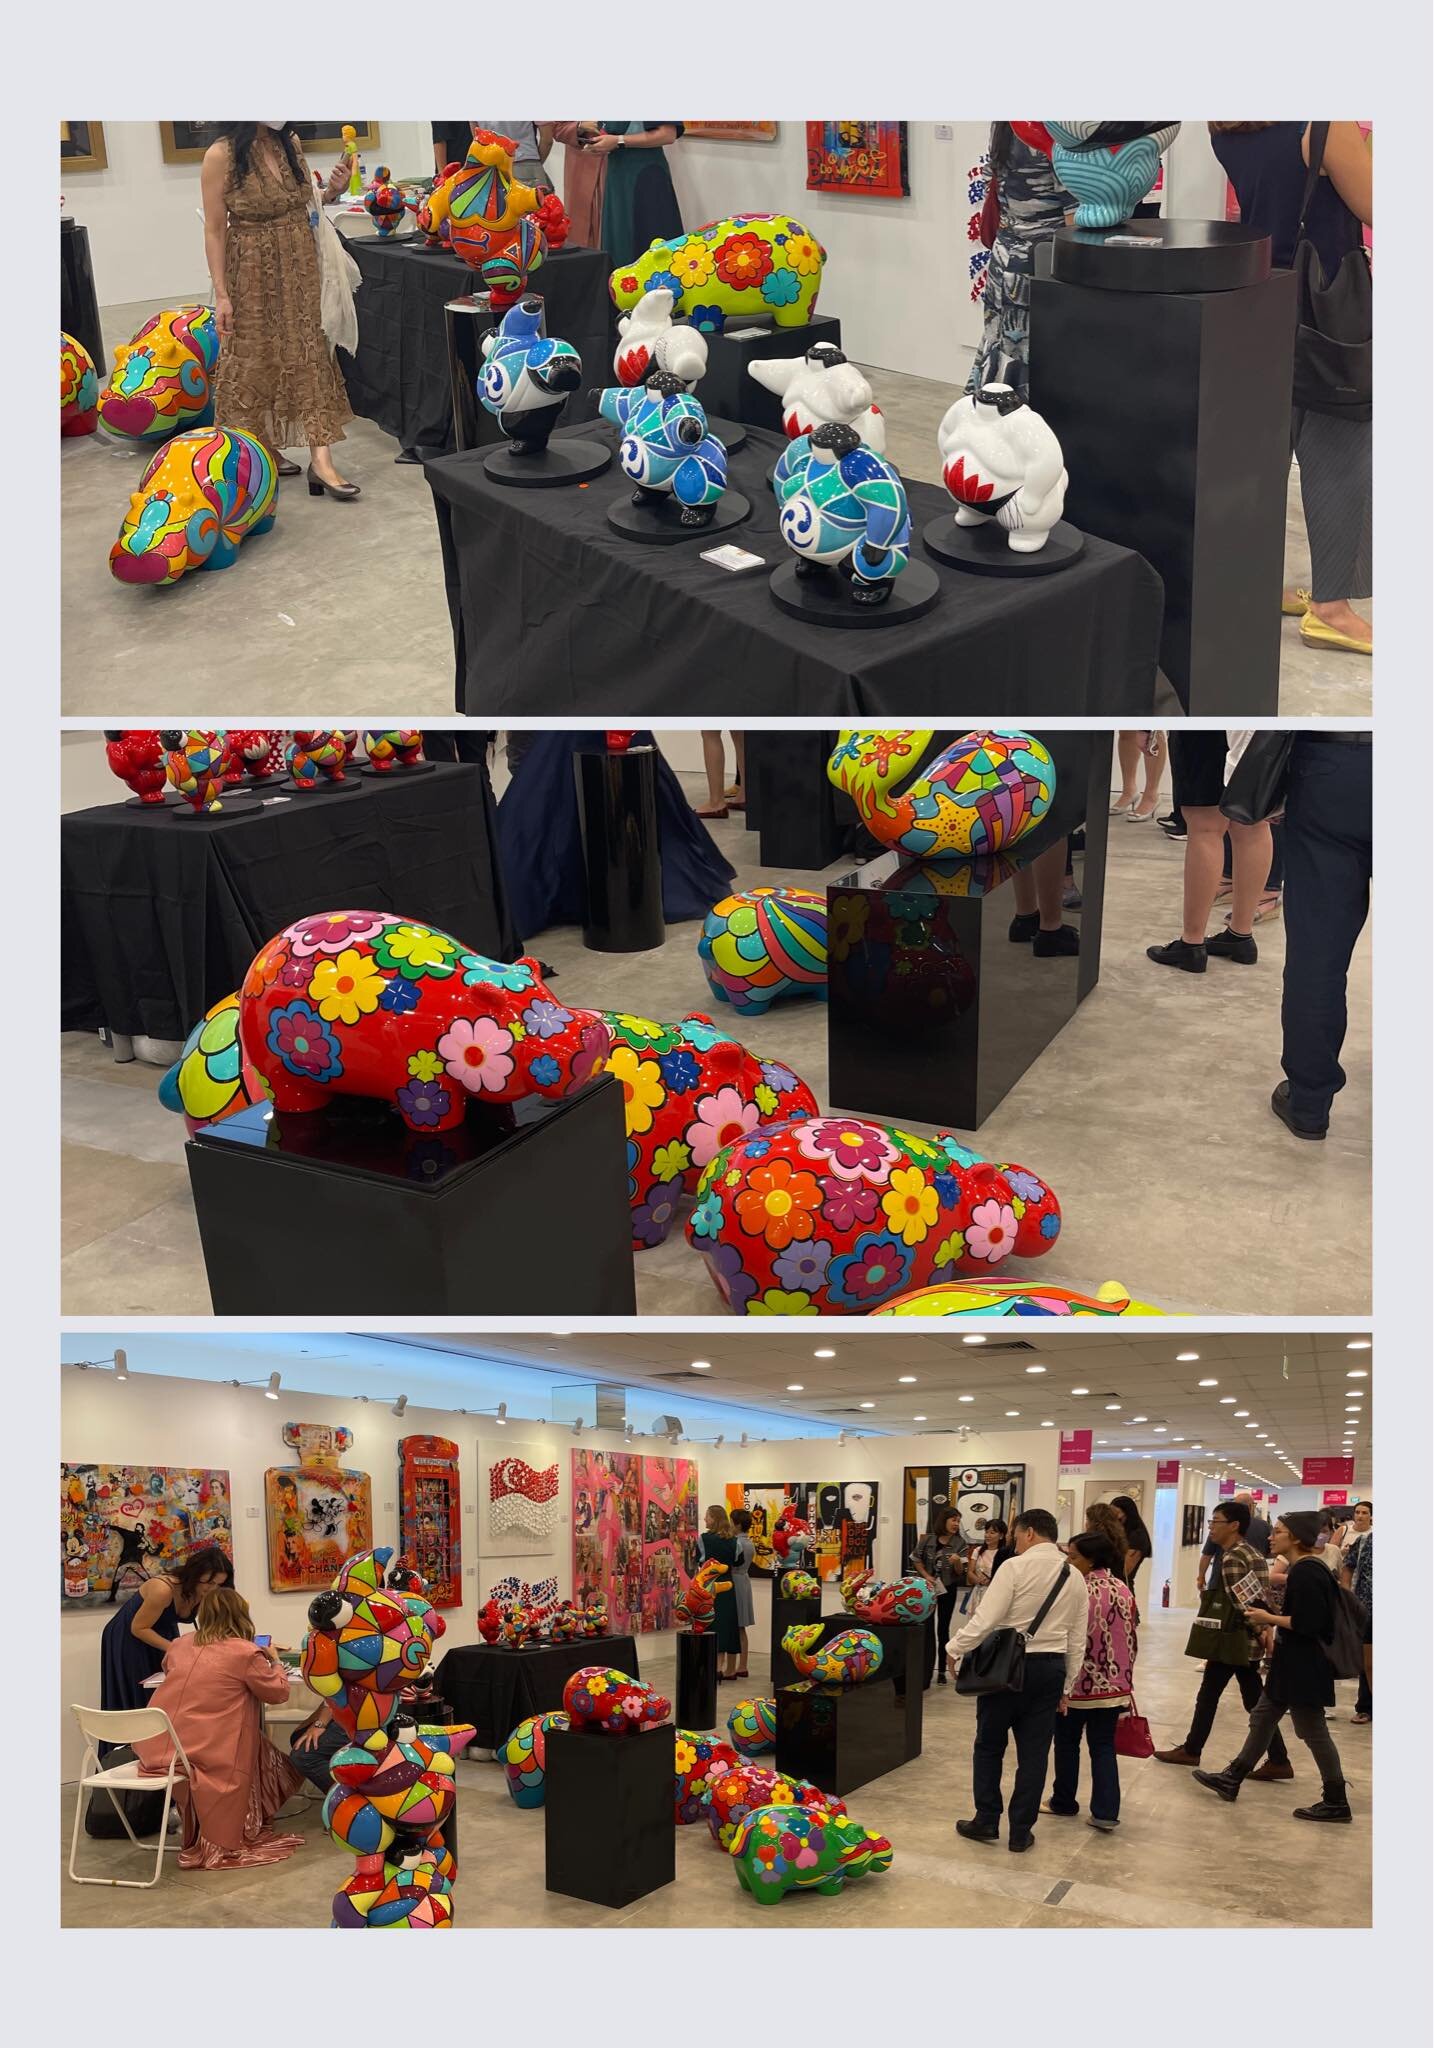 Today is the 2nd day of Affordable Art Fair Singapore, please come and see me!